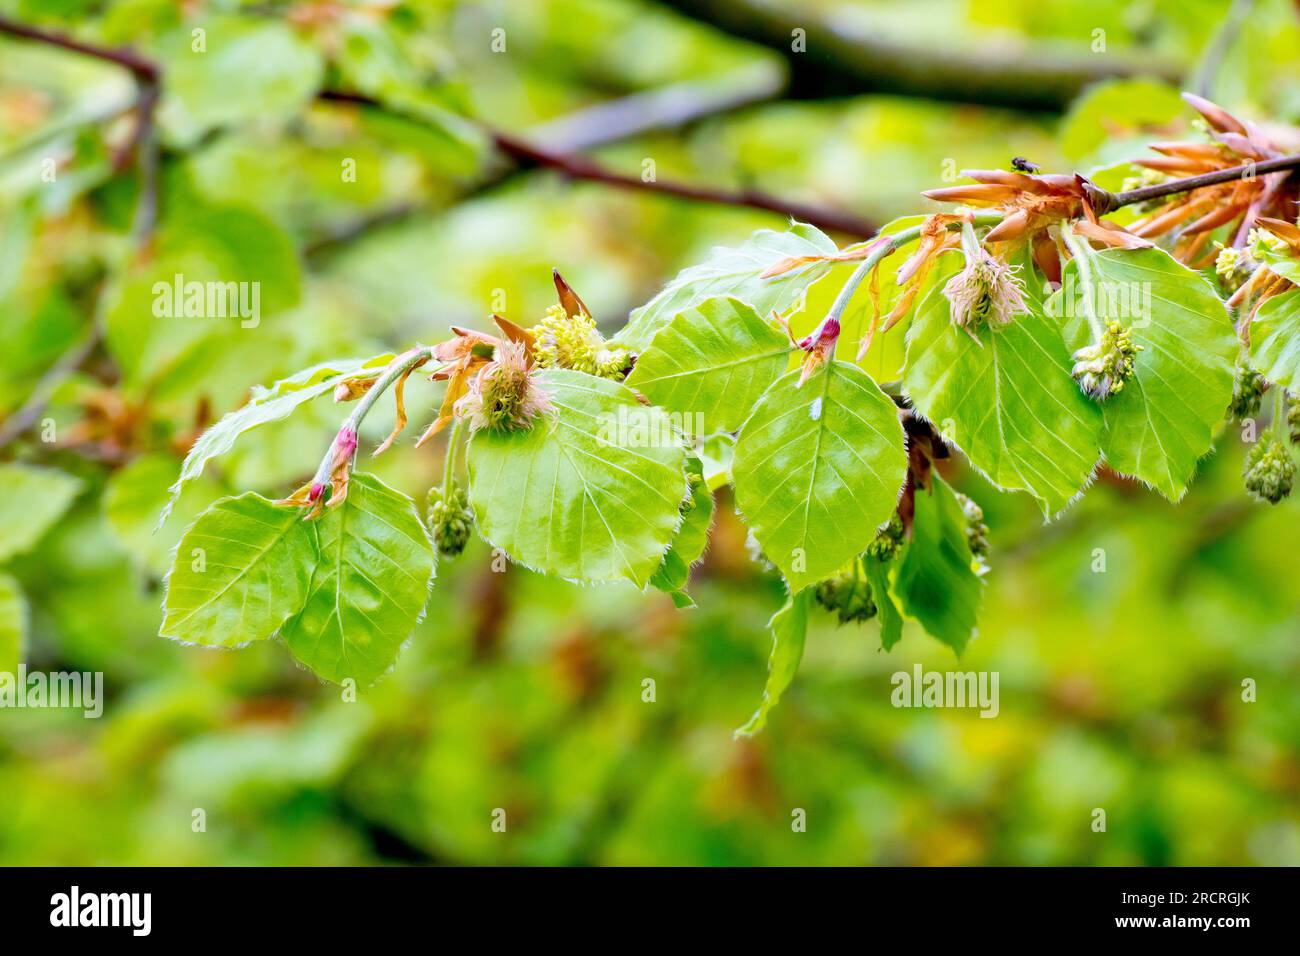 Beech (fagus sylvatica), close up showing the male and female flowers of the tree growing amongst the new leaves put out in the spring. Stock Photo